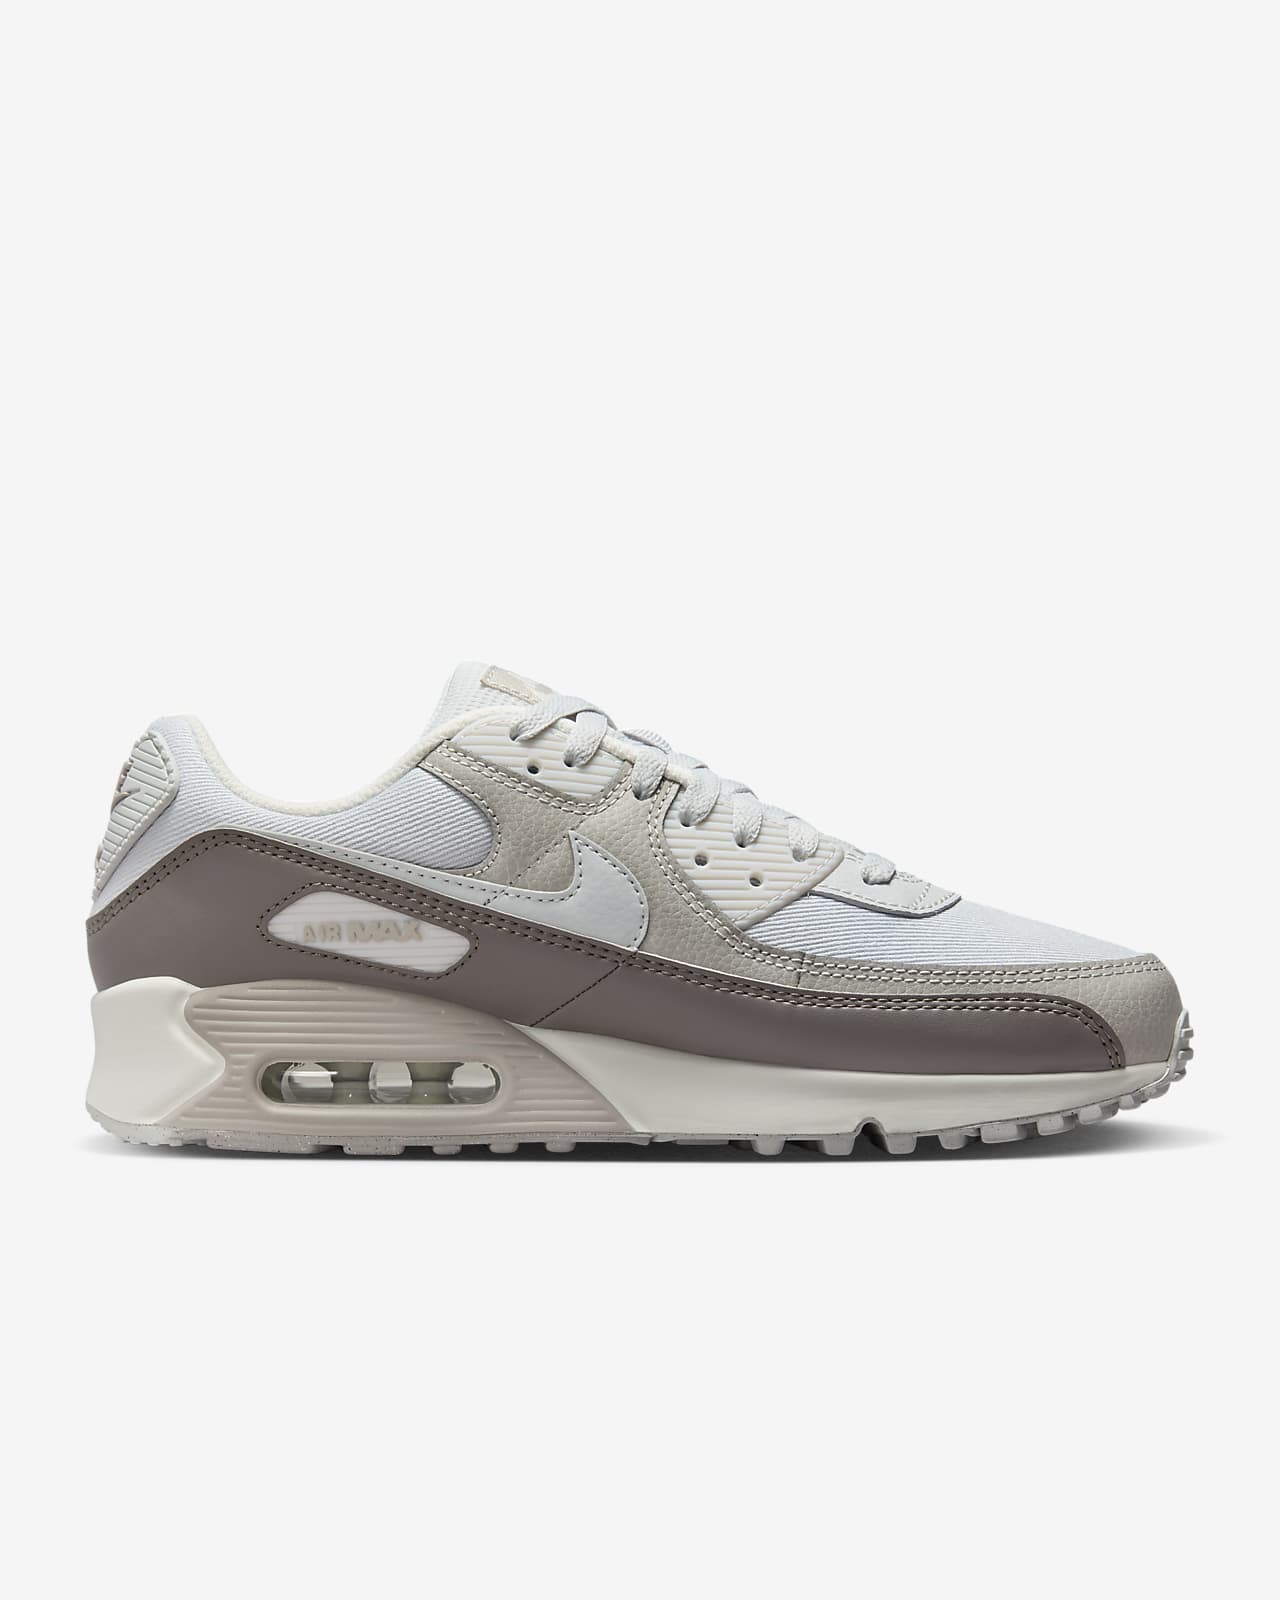 Nike Airmax 90 x off white Men's Sneakers Shoes